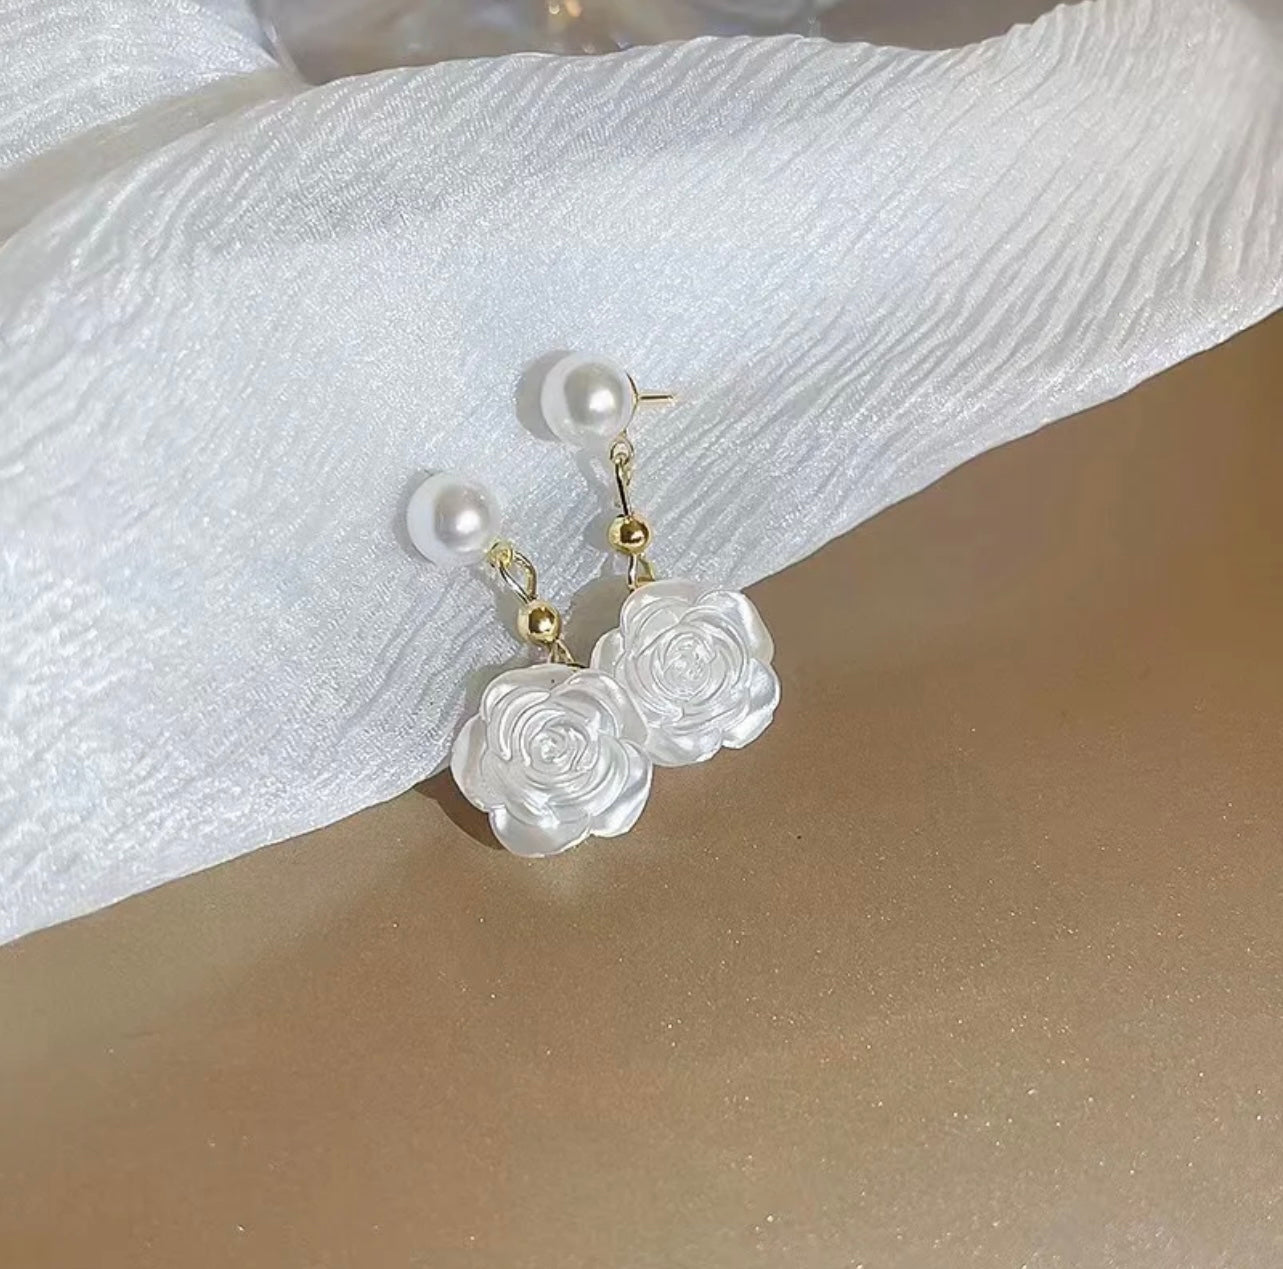 rose pearl earring white color - front by sserafim